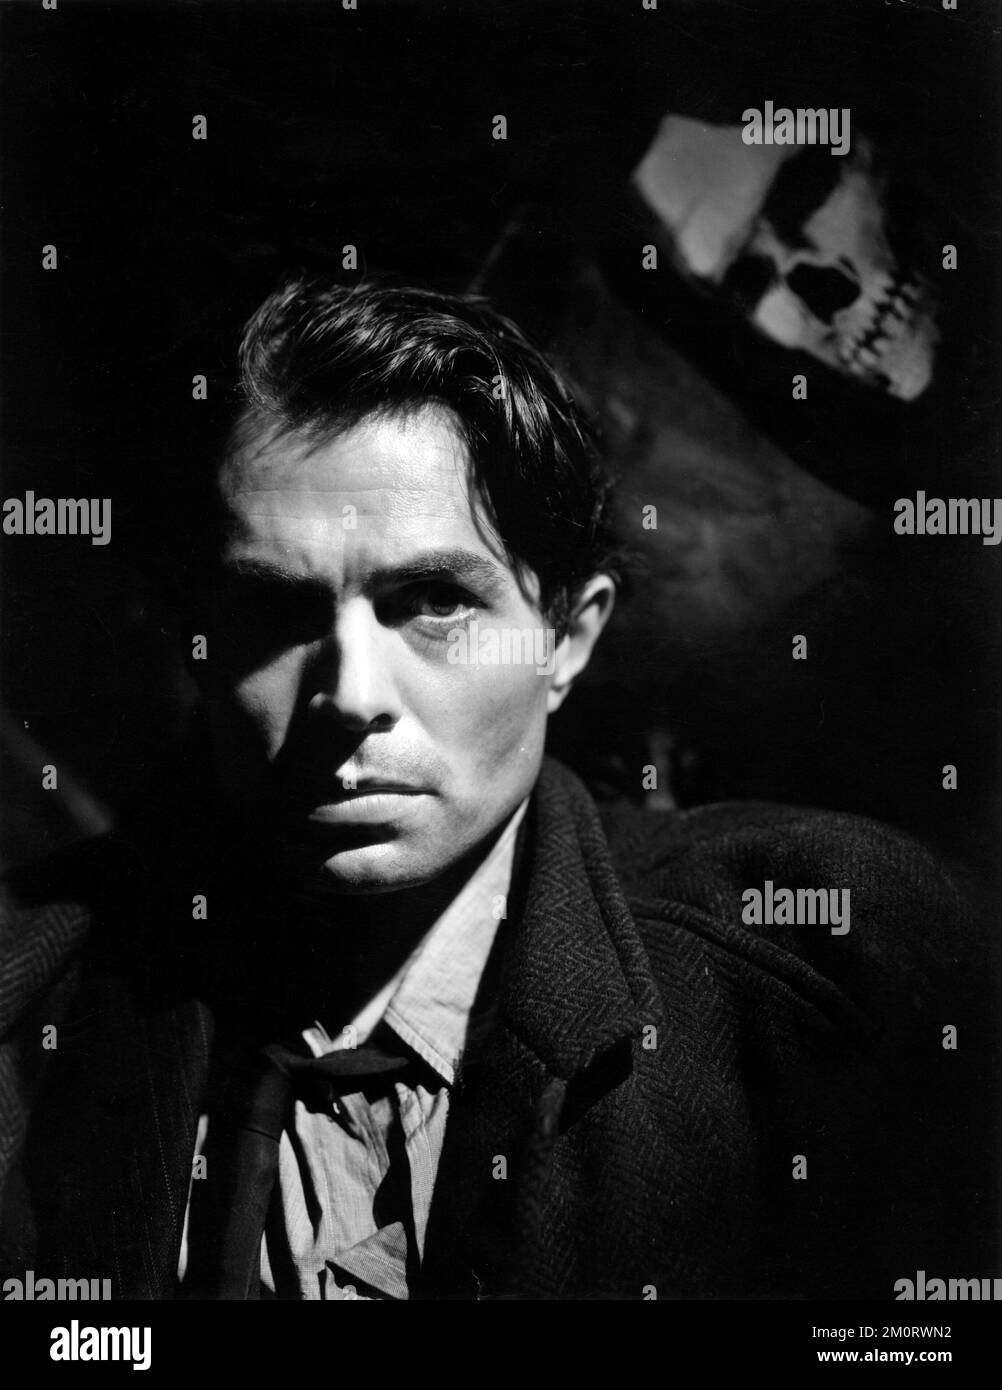 JAMES MASON in ODD MAN OUT (1947), directed by CAROL REED. Credit: TWO ...